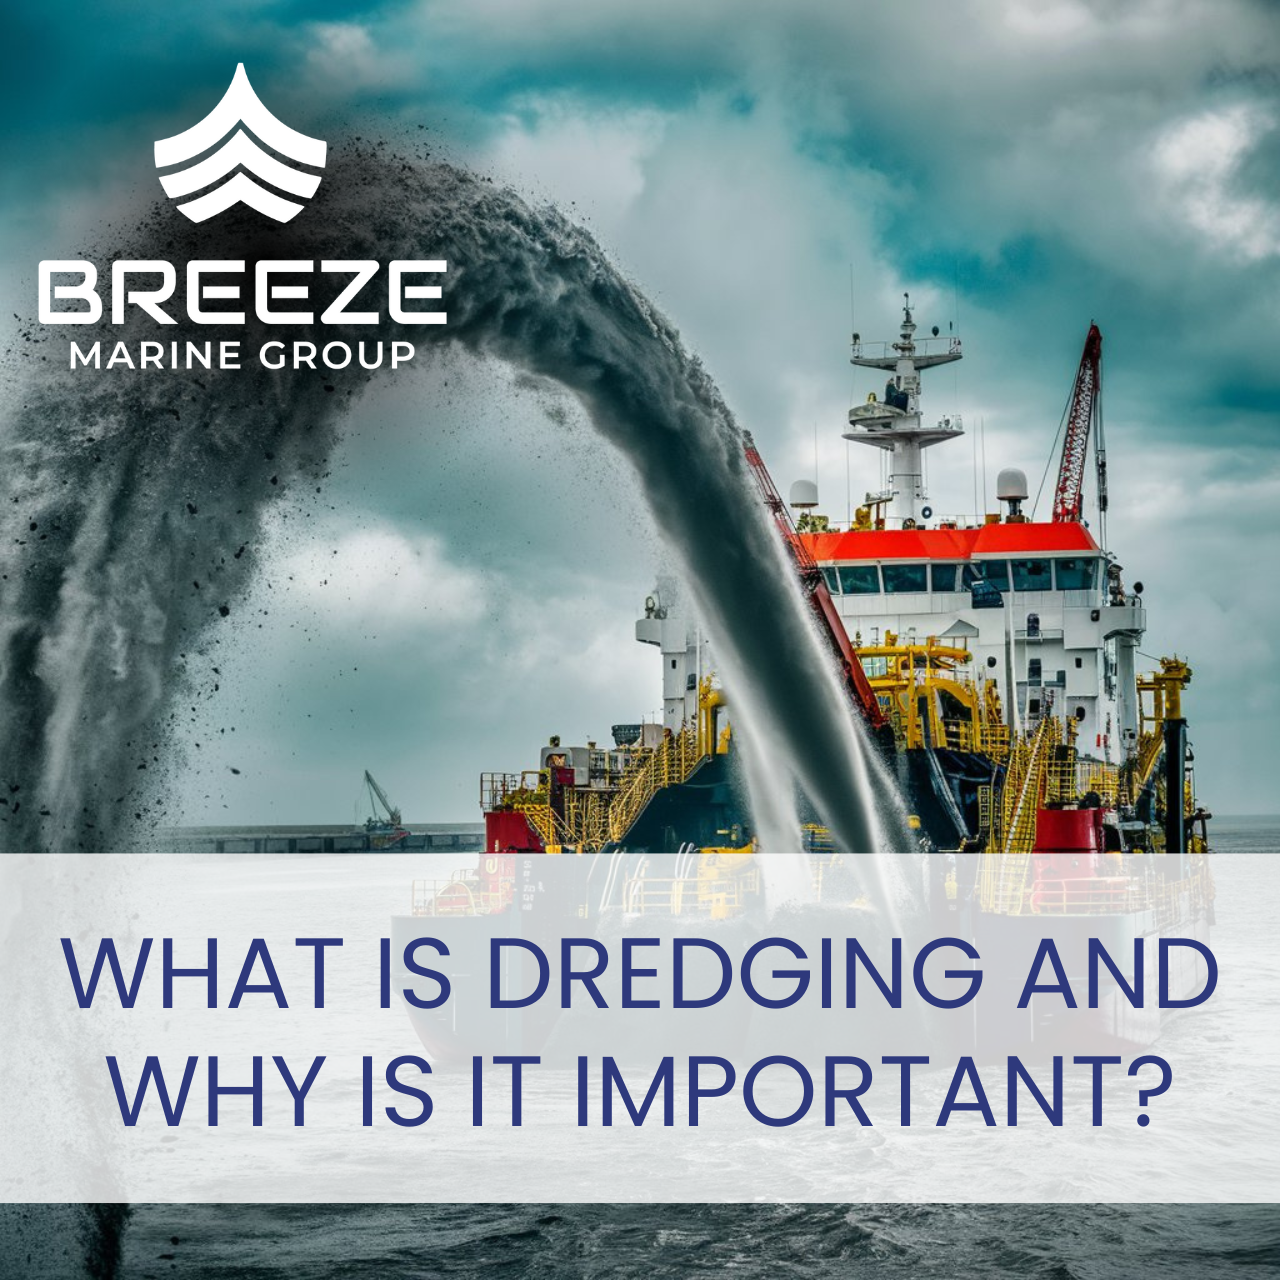 What Is Dredging and Why Is It Important?